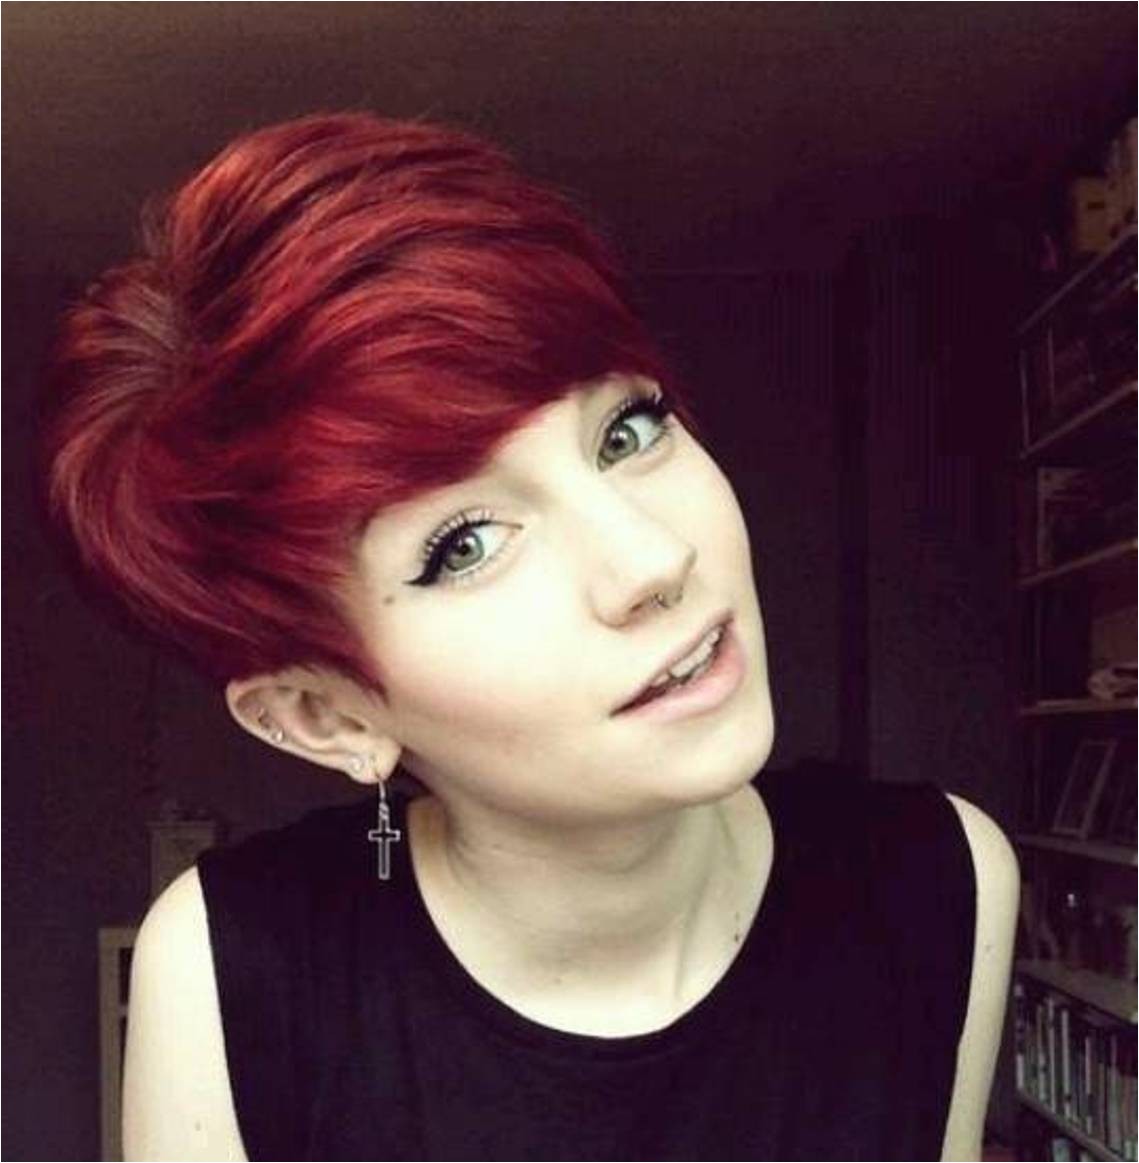 24 really cute short red hairstyles